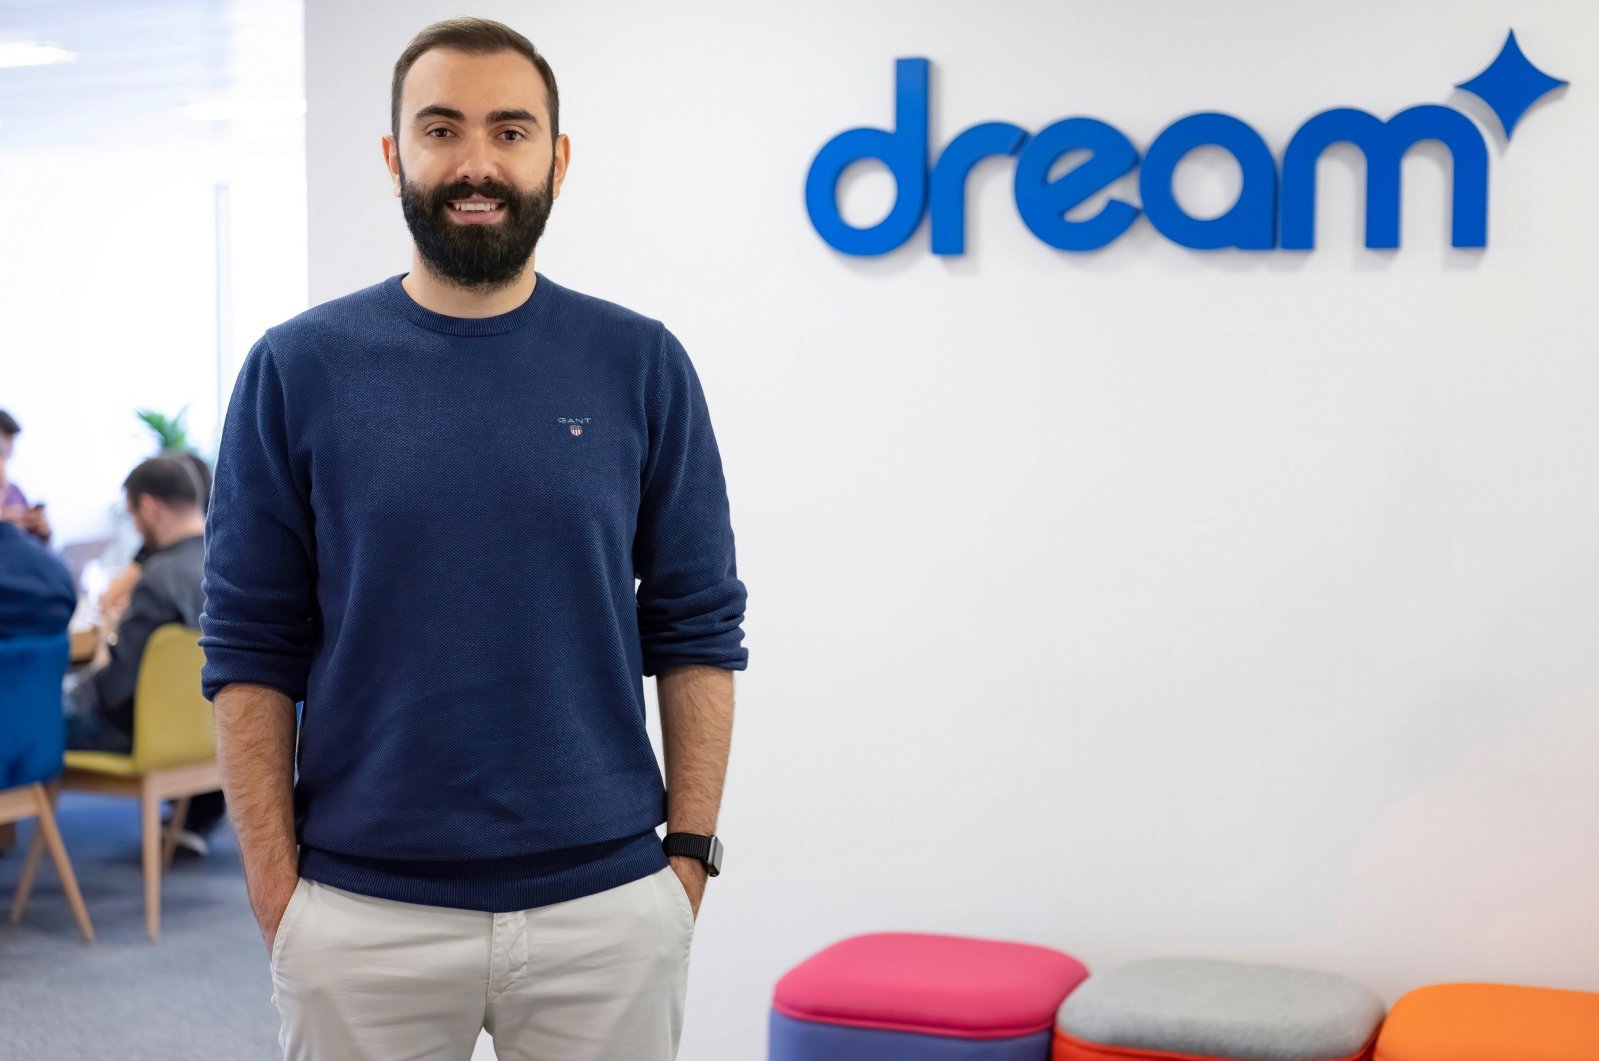 Co-founder and CEO Soner Aydemir of Turkish mobile games startup Dream Games is seen in this undated file photo. (IHA Photo)